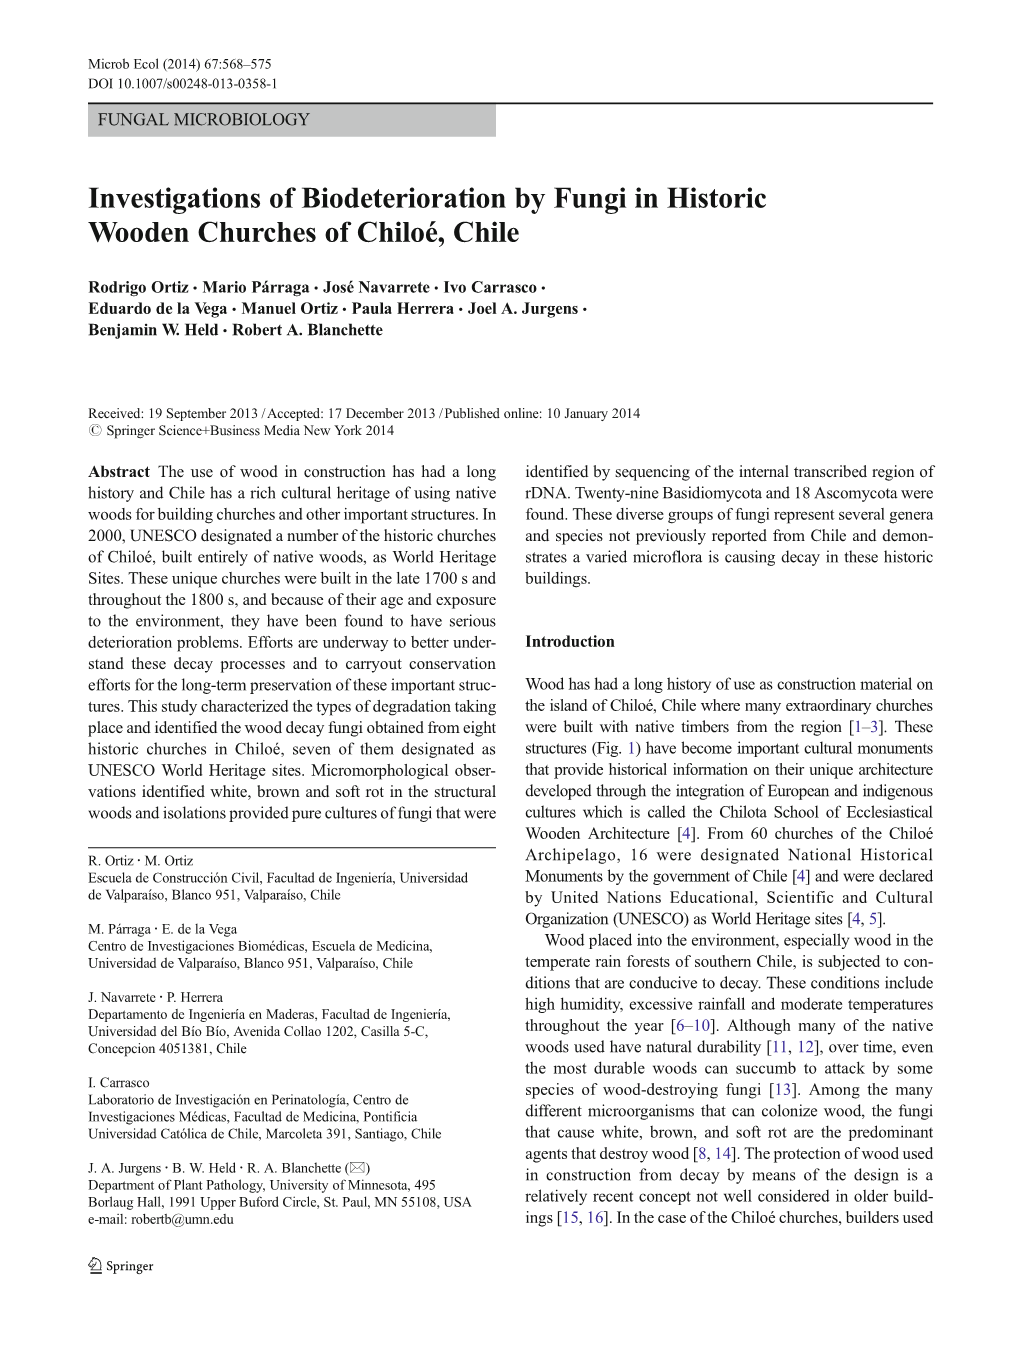 Investigations of Biodeterioration by Fungi in Historic Wooden Churches of Chiloé, Chile